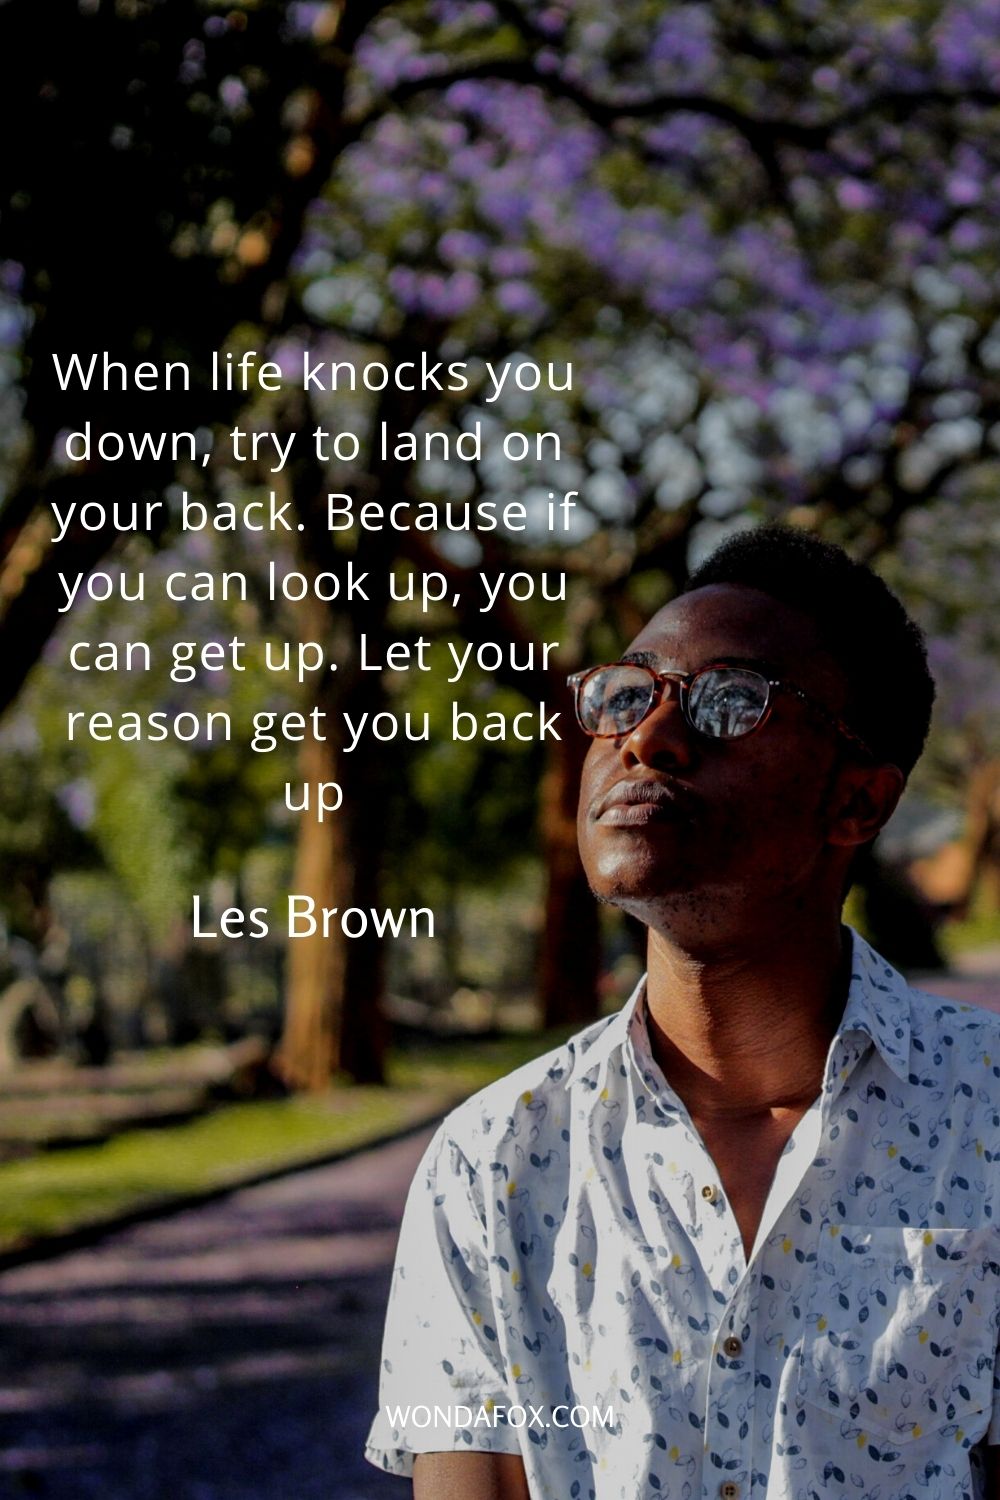 When life knocks you down, try to land on your back. Because if you can look up, you can get up. Let your reason get you back up. 